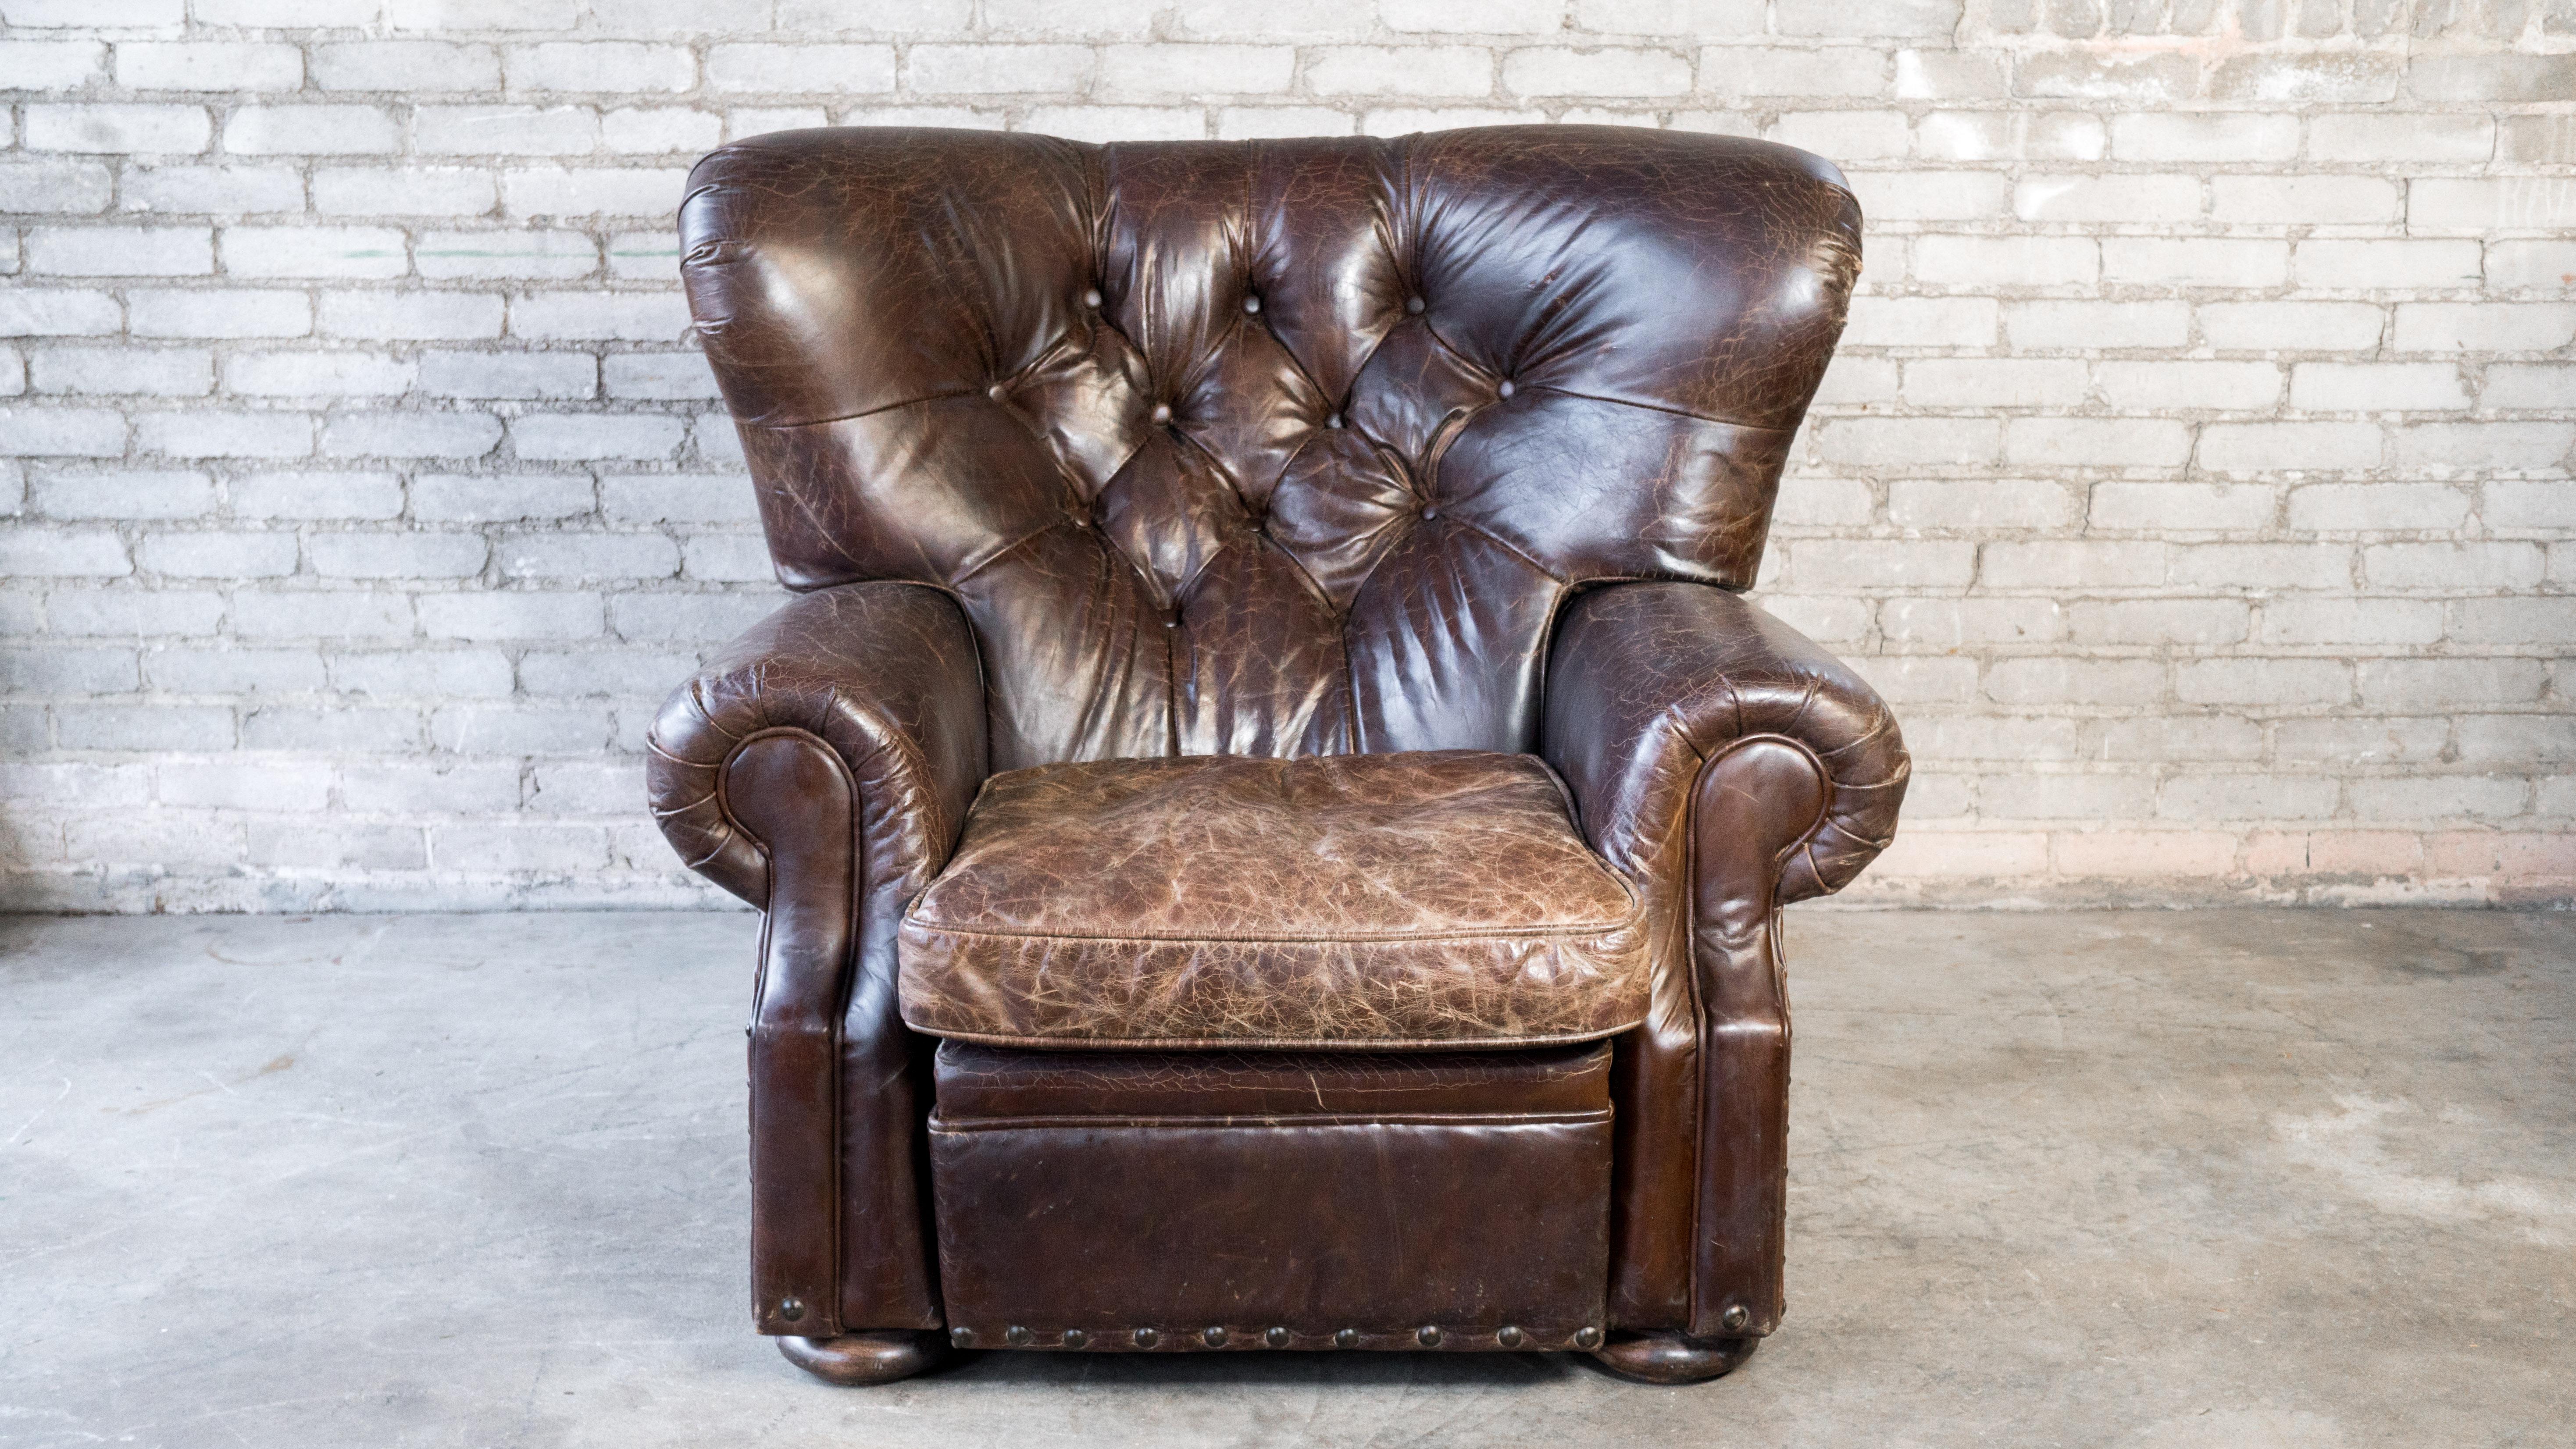 Restoration Hardware 'Churchill' recliner writer's chair, in a lovely dark brown with nice distressed patina. Thick supple leather with tufted backrest and brass nailhead trim. Timeless English Traditional design. Supportive cushion, immersive